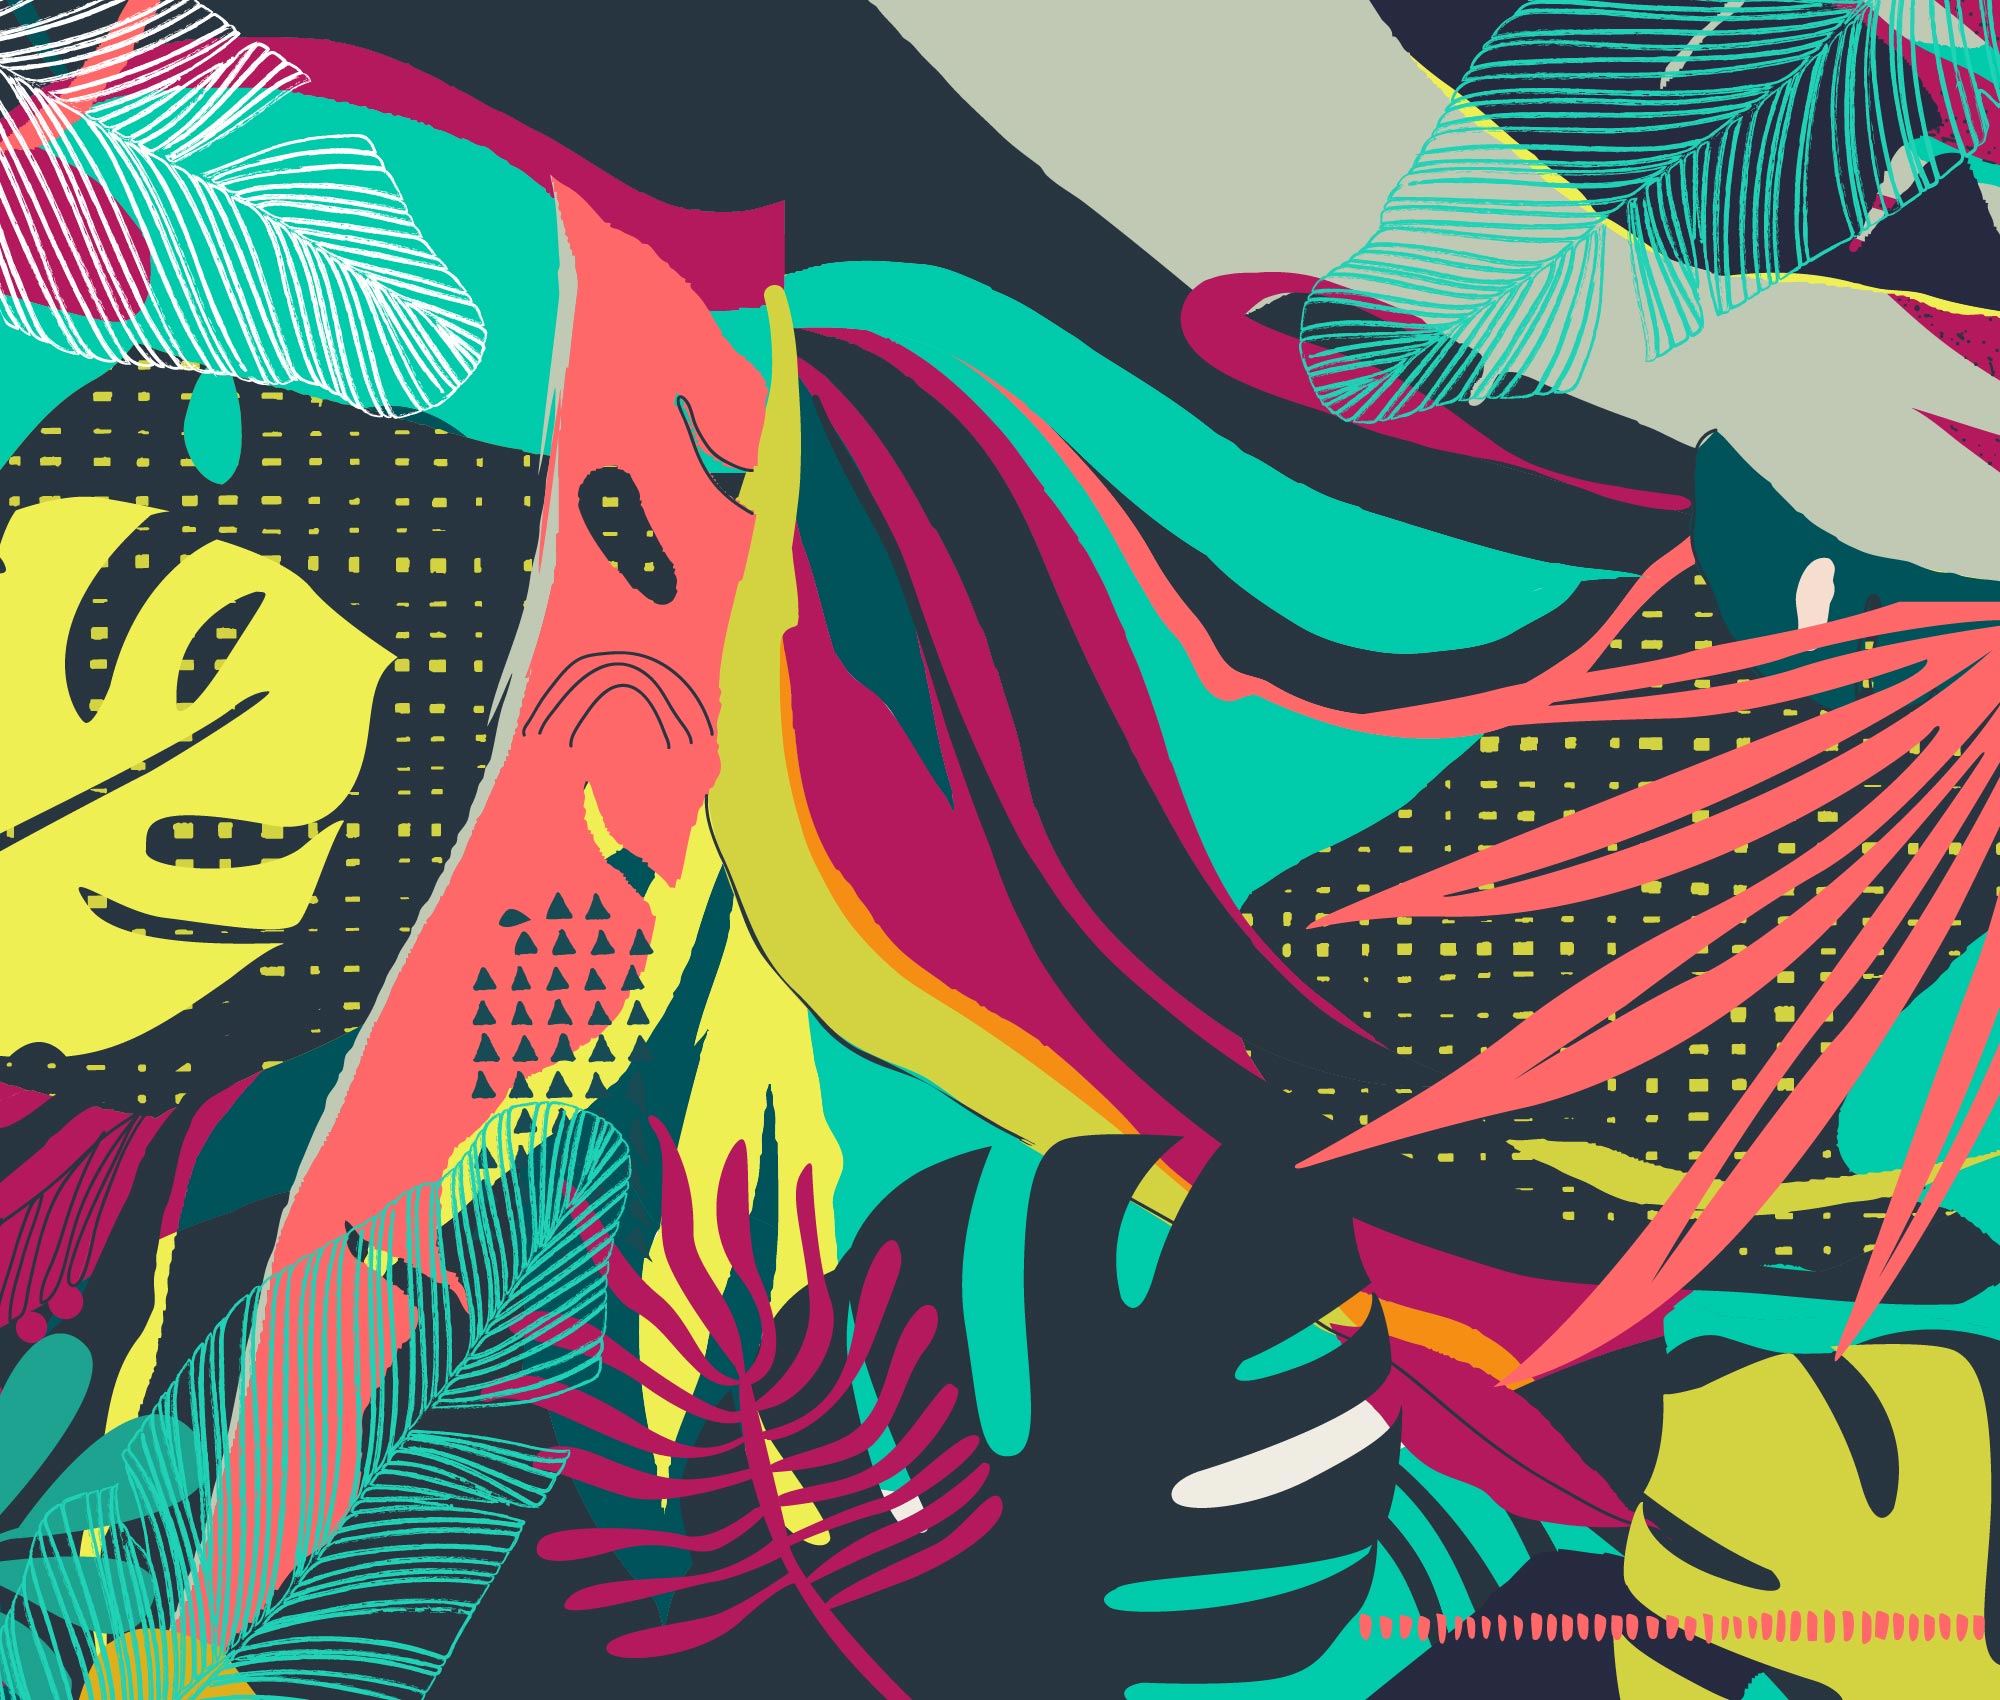 Kau Ba's colorful abstract leaf pattern in bright colors